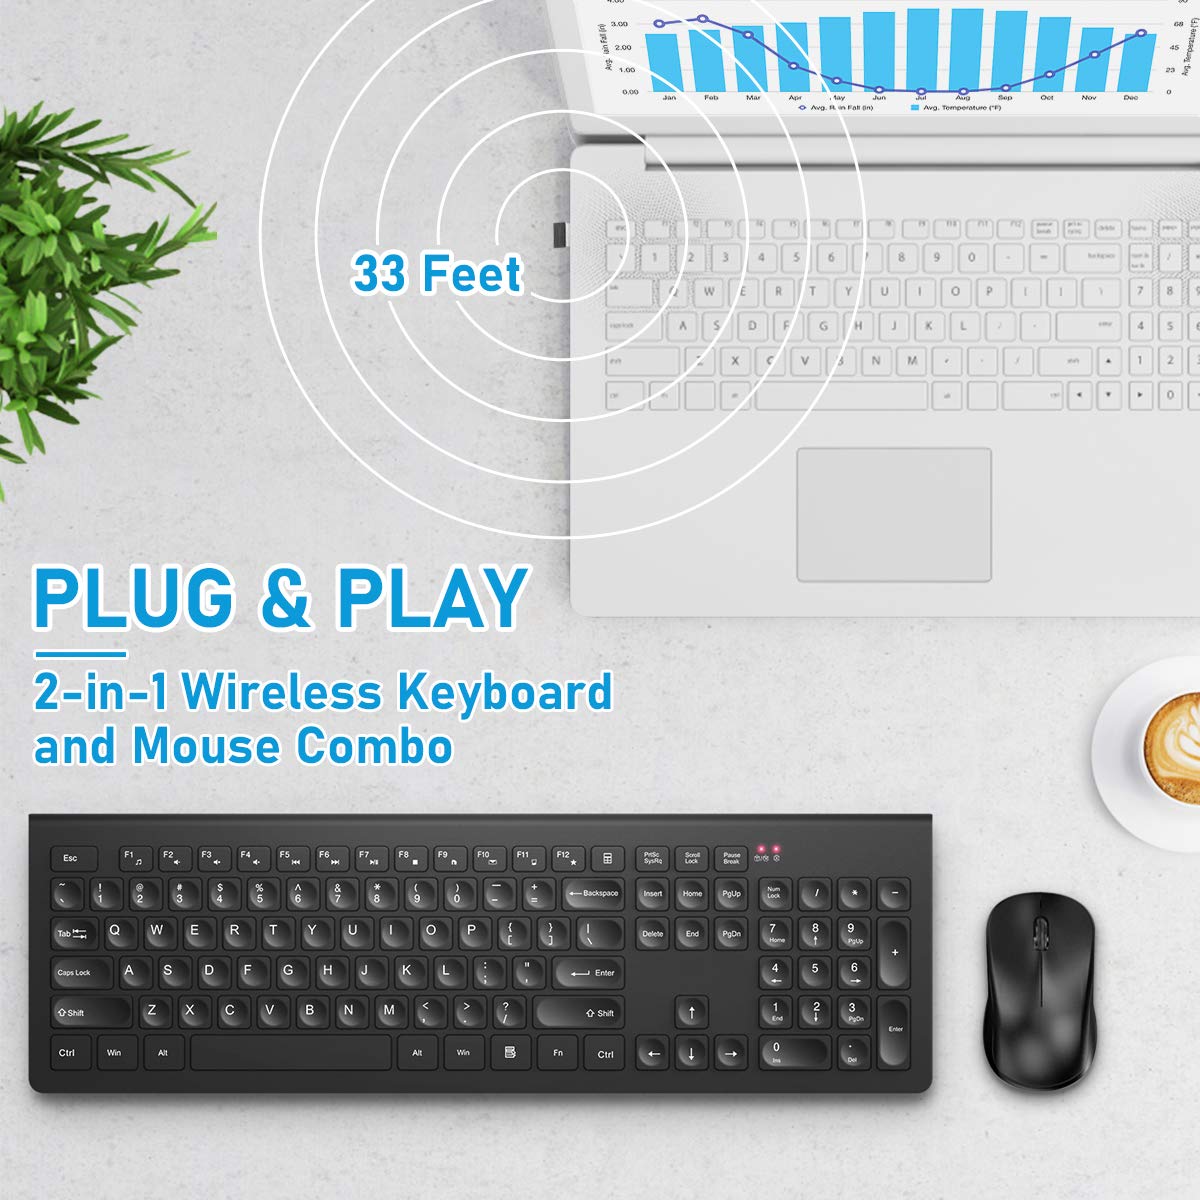 Wireless Keyboard and Mouse Combo, RATEL 2.4GHz Full Size USB Keyboard Mouse Ergonomic Quiet Keyboard Mouse Set for Laptop, PC, Mac, Computer, Desktop, Notebook, Windows(Black)